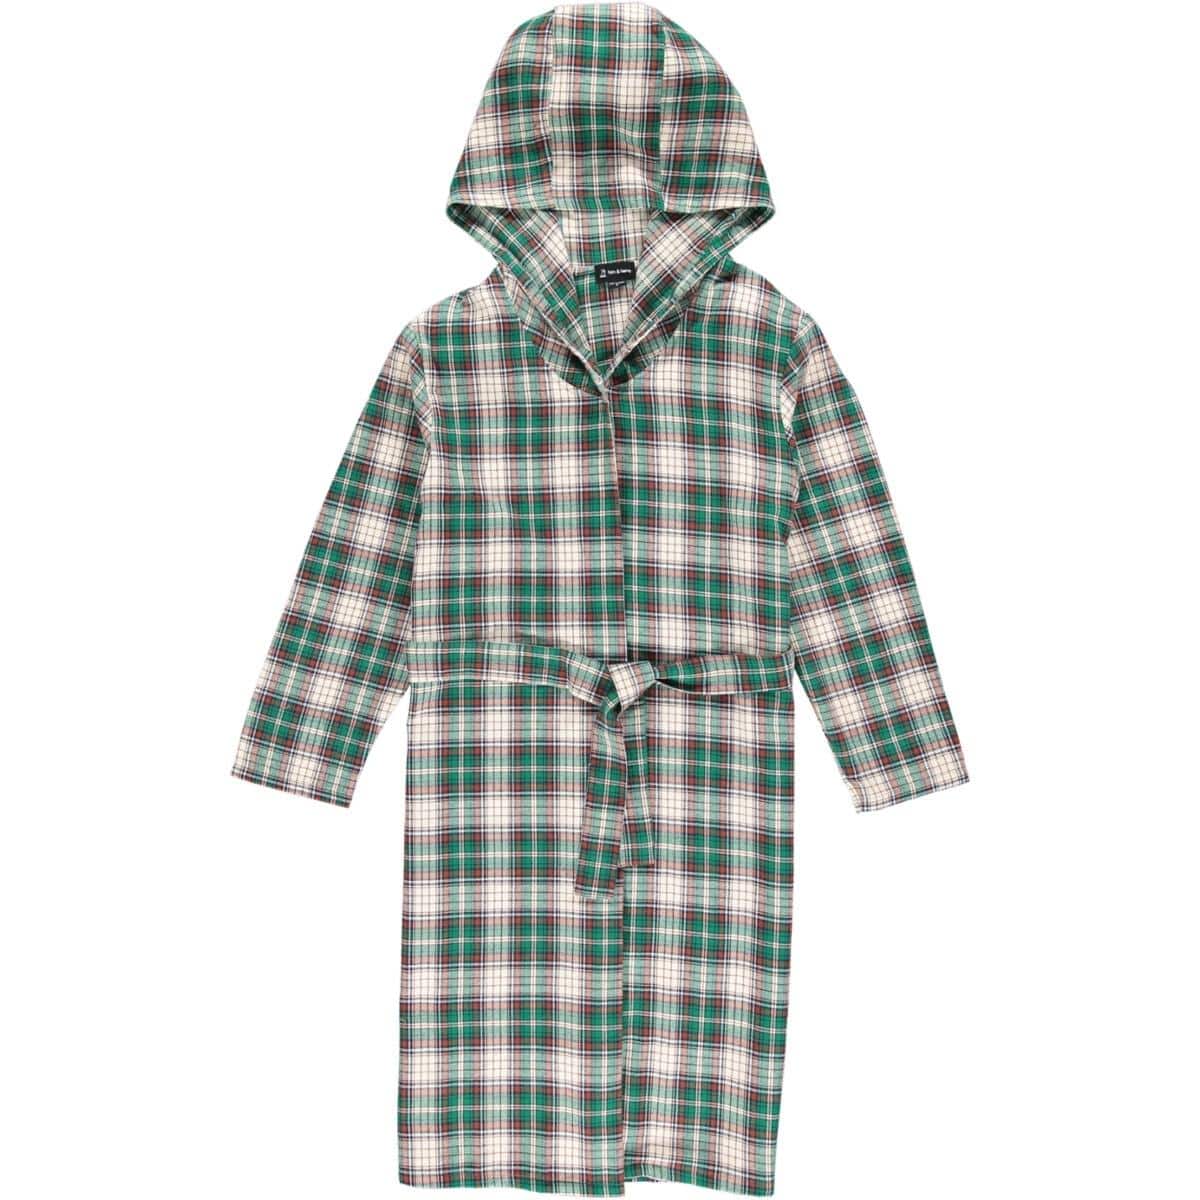 Munford Lounge Robe - Green, Brown, Navy Plaid - Twinkle Twinkle Little One